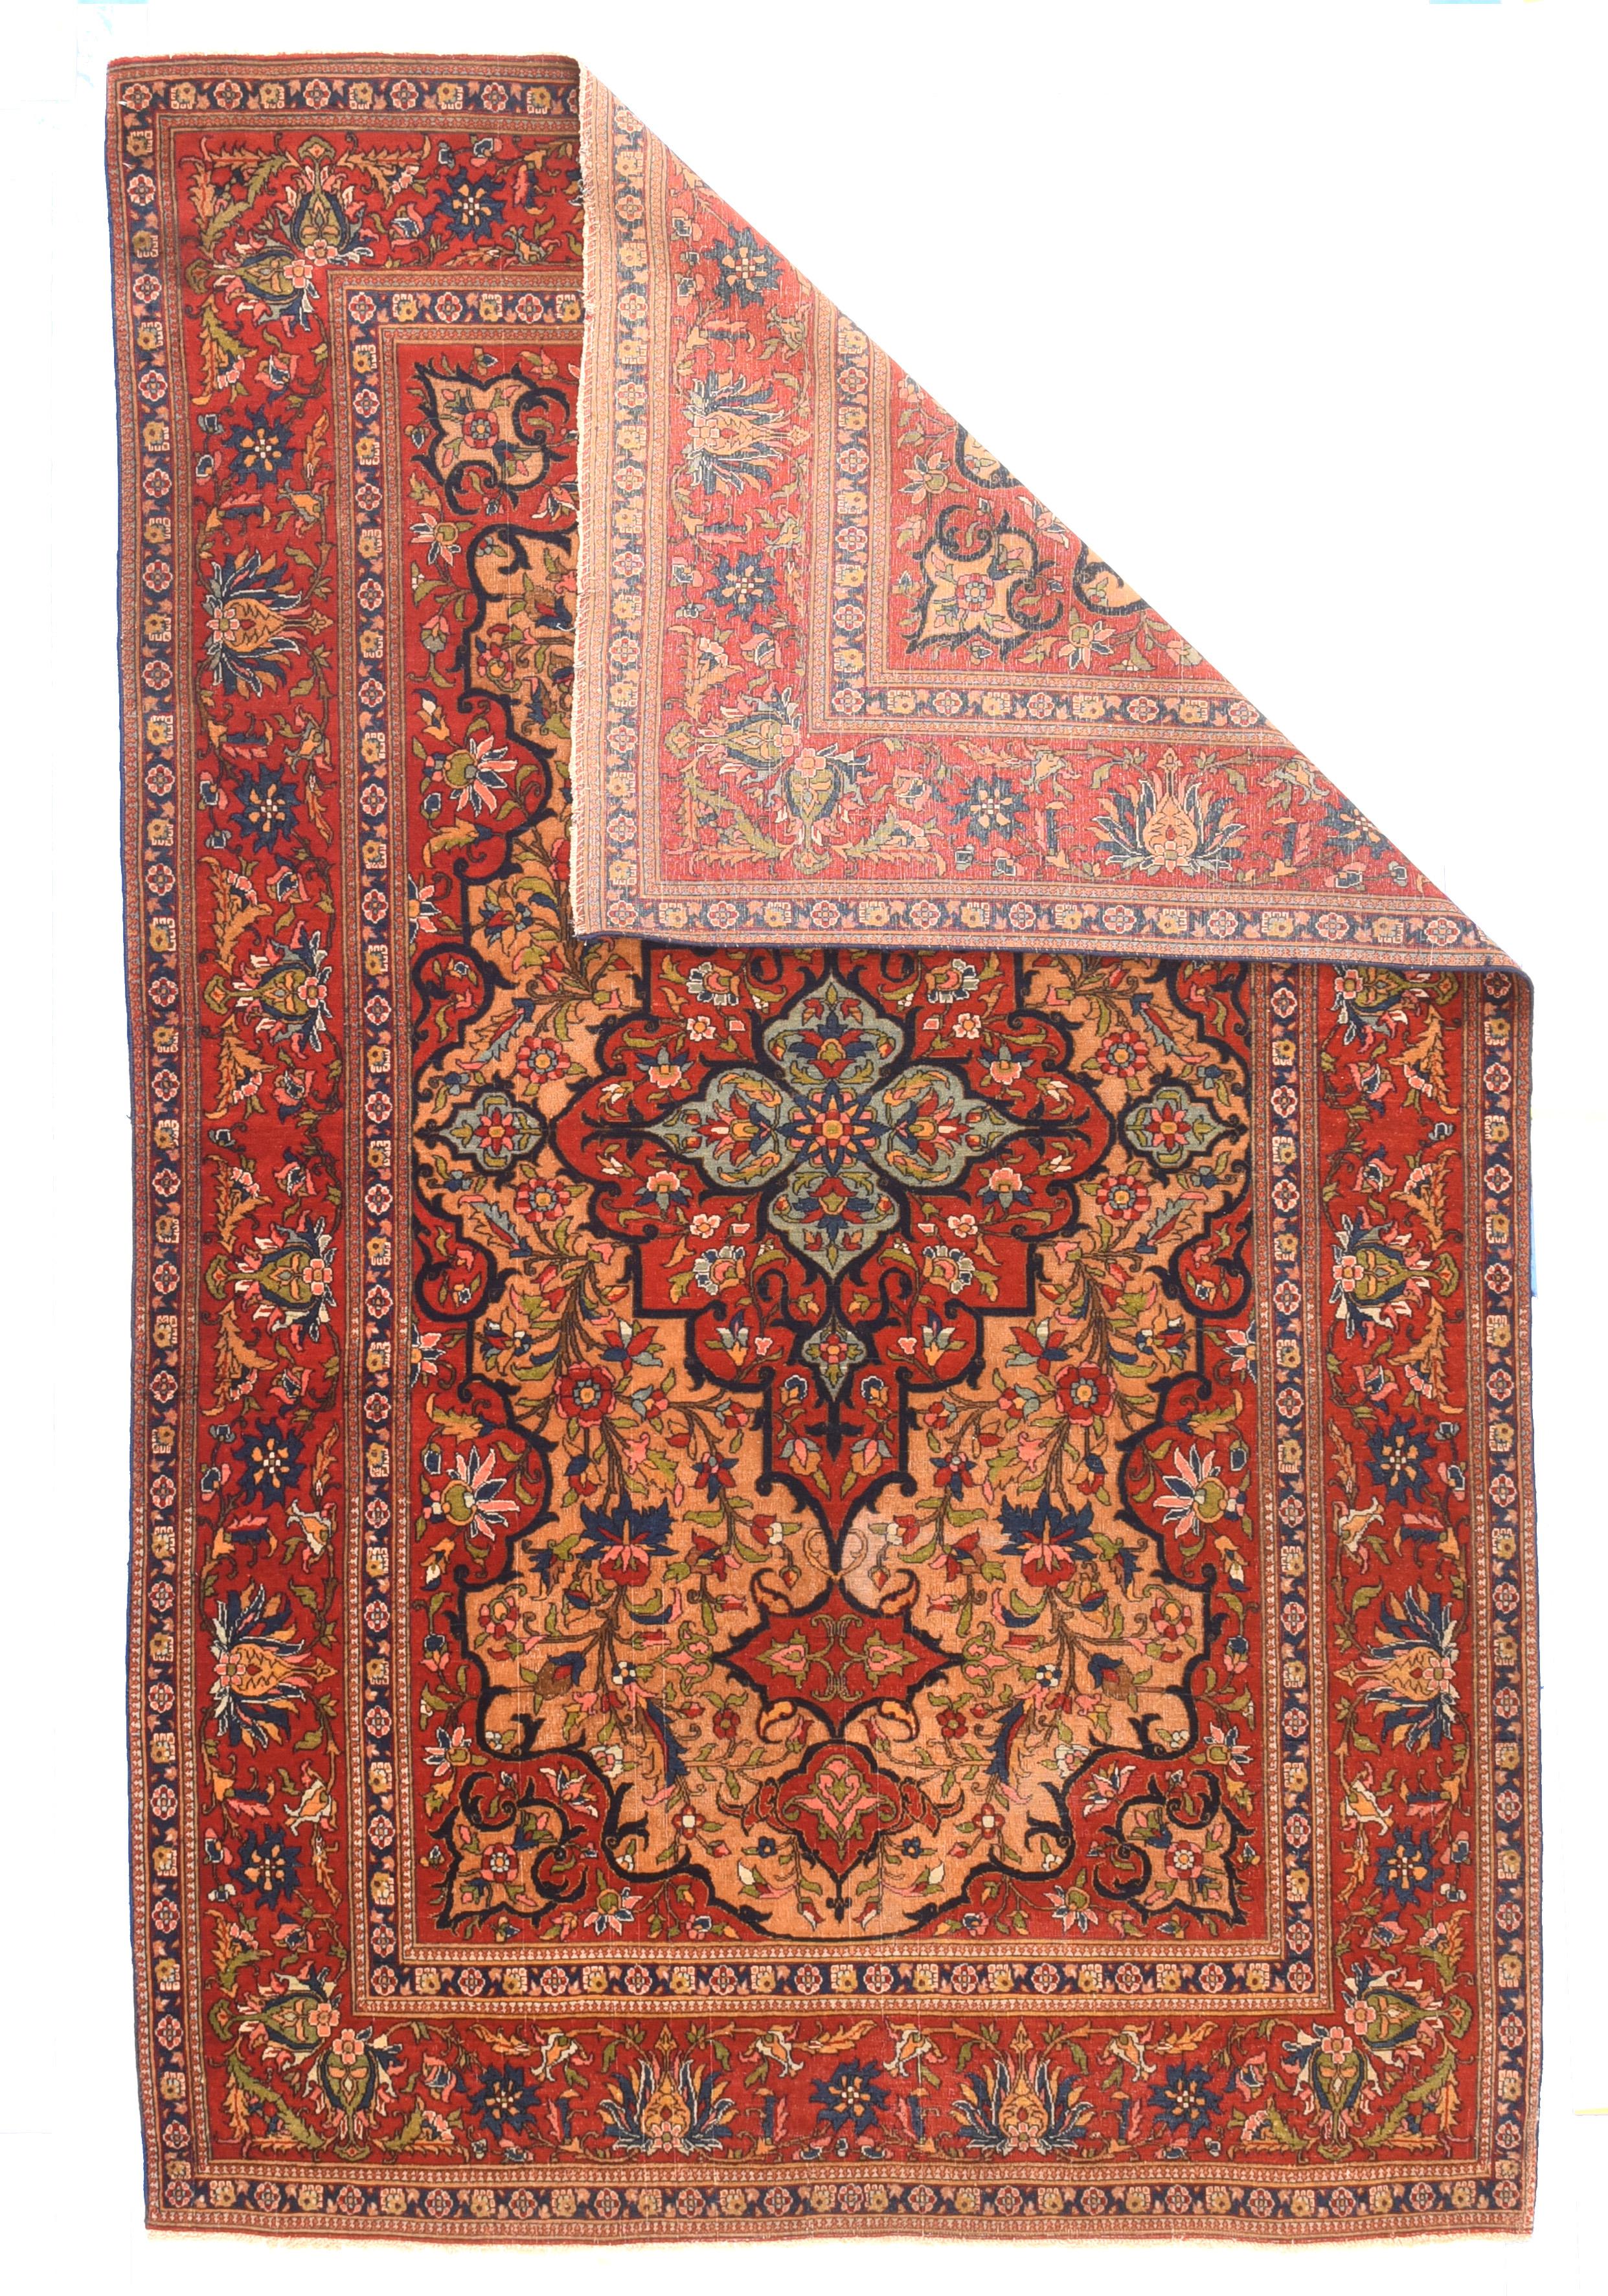 This attractive interThis interwar central Persian scatter shows a red stepped medallion with doubled pendants, based in a pale blue quatrefoil core, with flowering vines symmetrically set all around, and braced by extended red en suite corners. Red